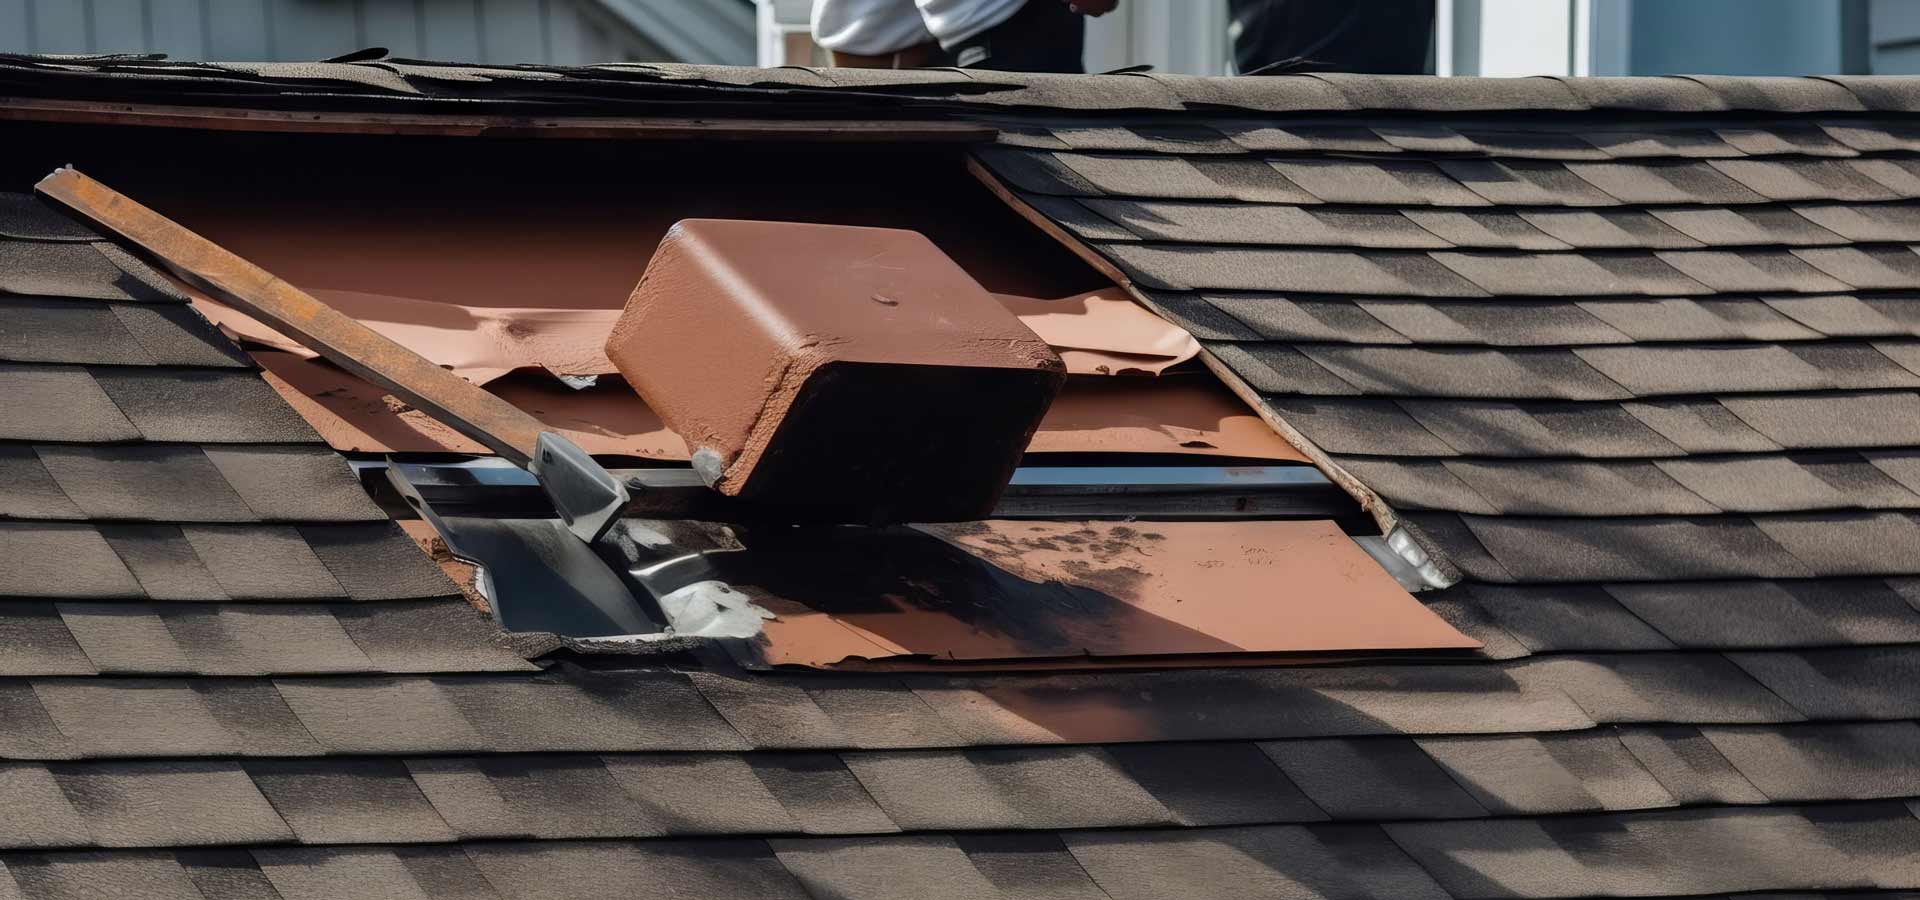 emergency roof repair services in nyc